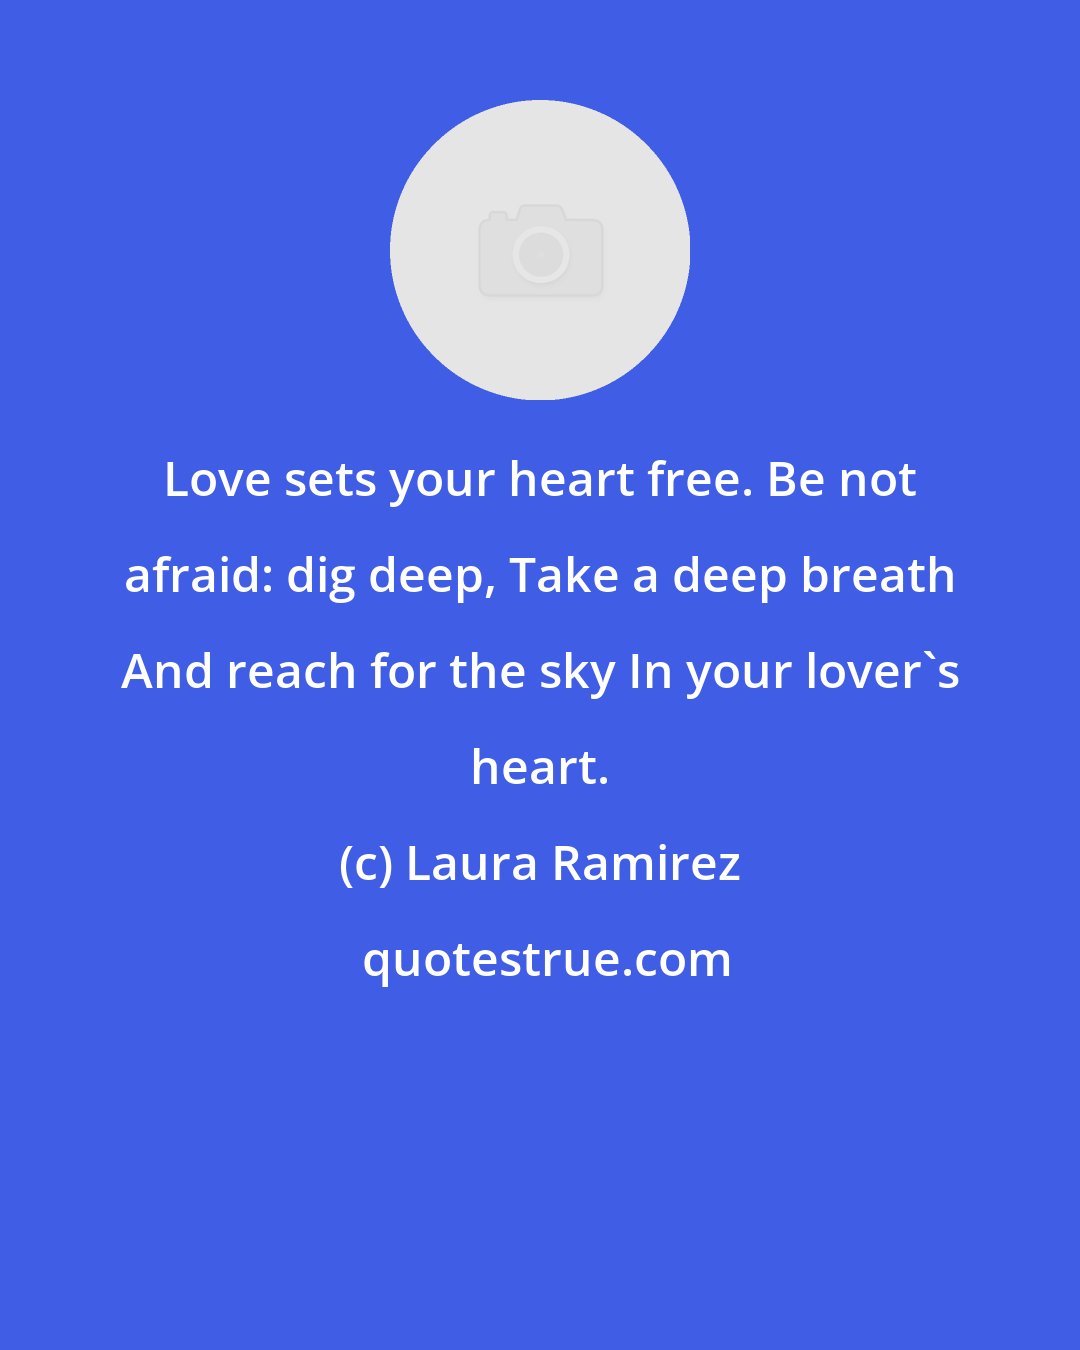 Laura Ramirez: Love sets your heart free. Be not afraid: dig deep, Take a deep breath And reach for the sky In your lover's heart.